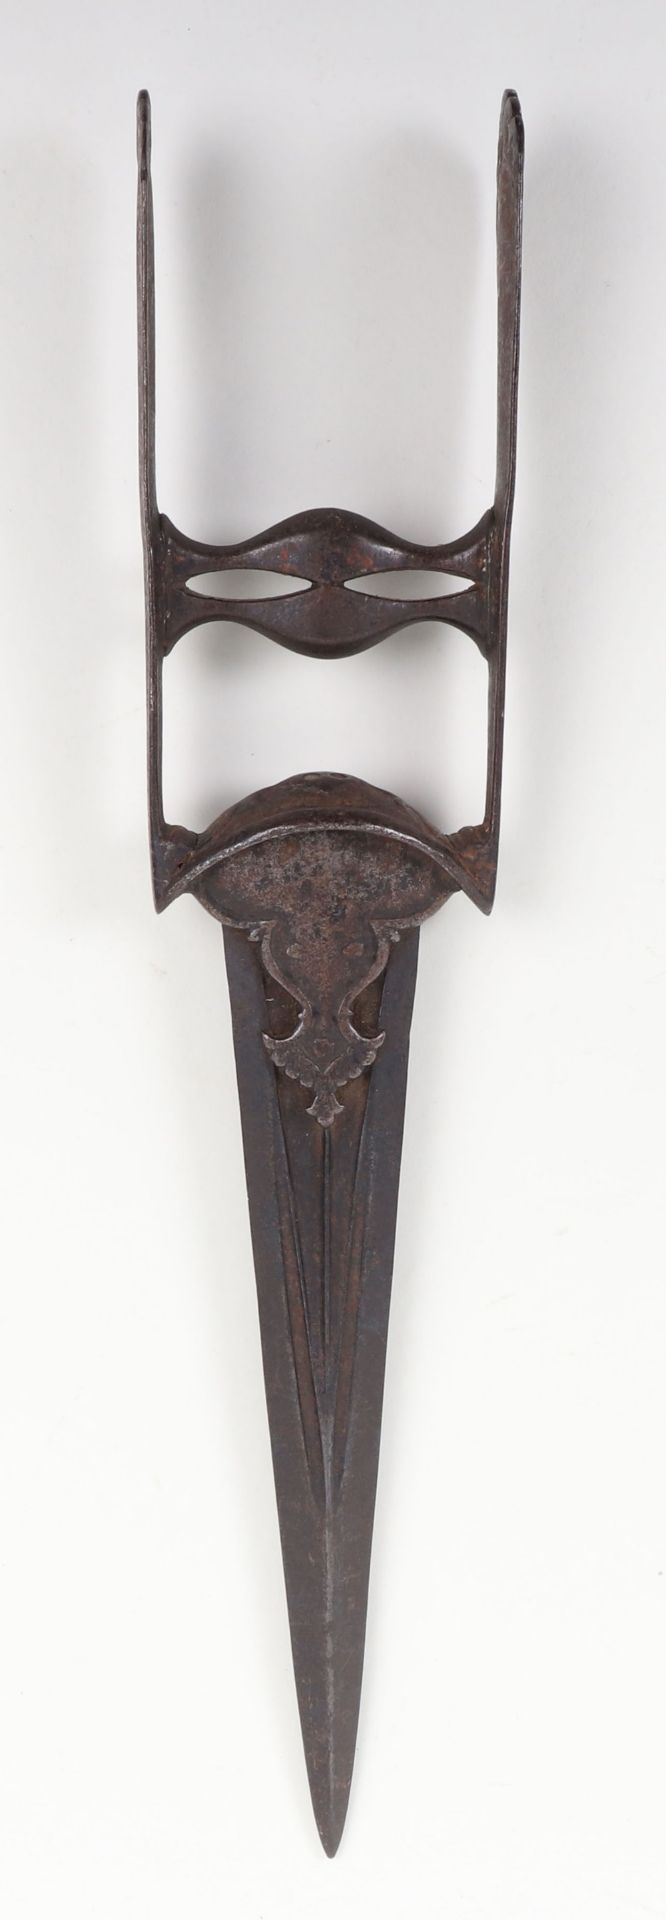 Indian Dagger Katar from the Tanjore Armoury, 17th Century